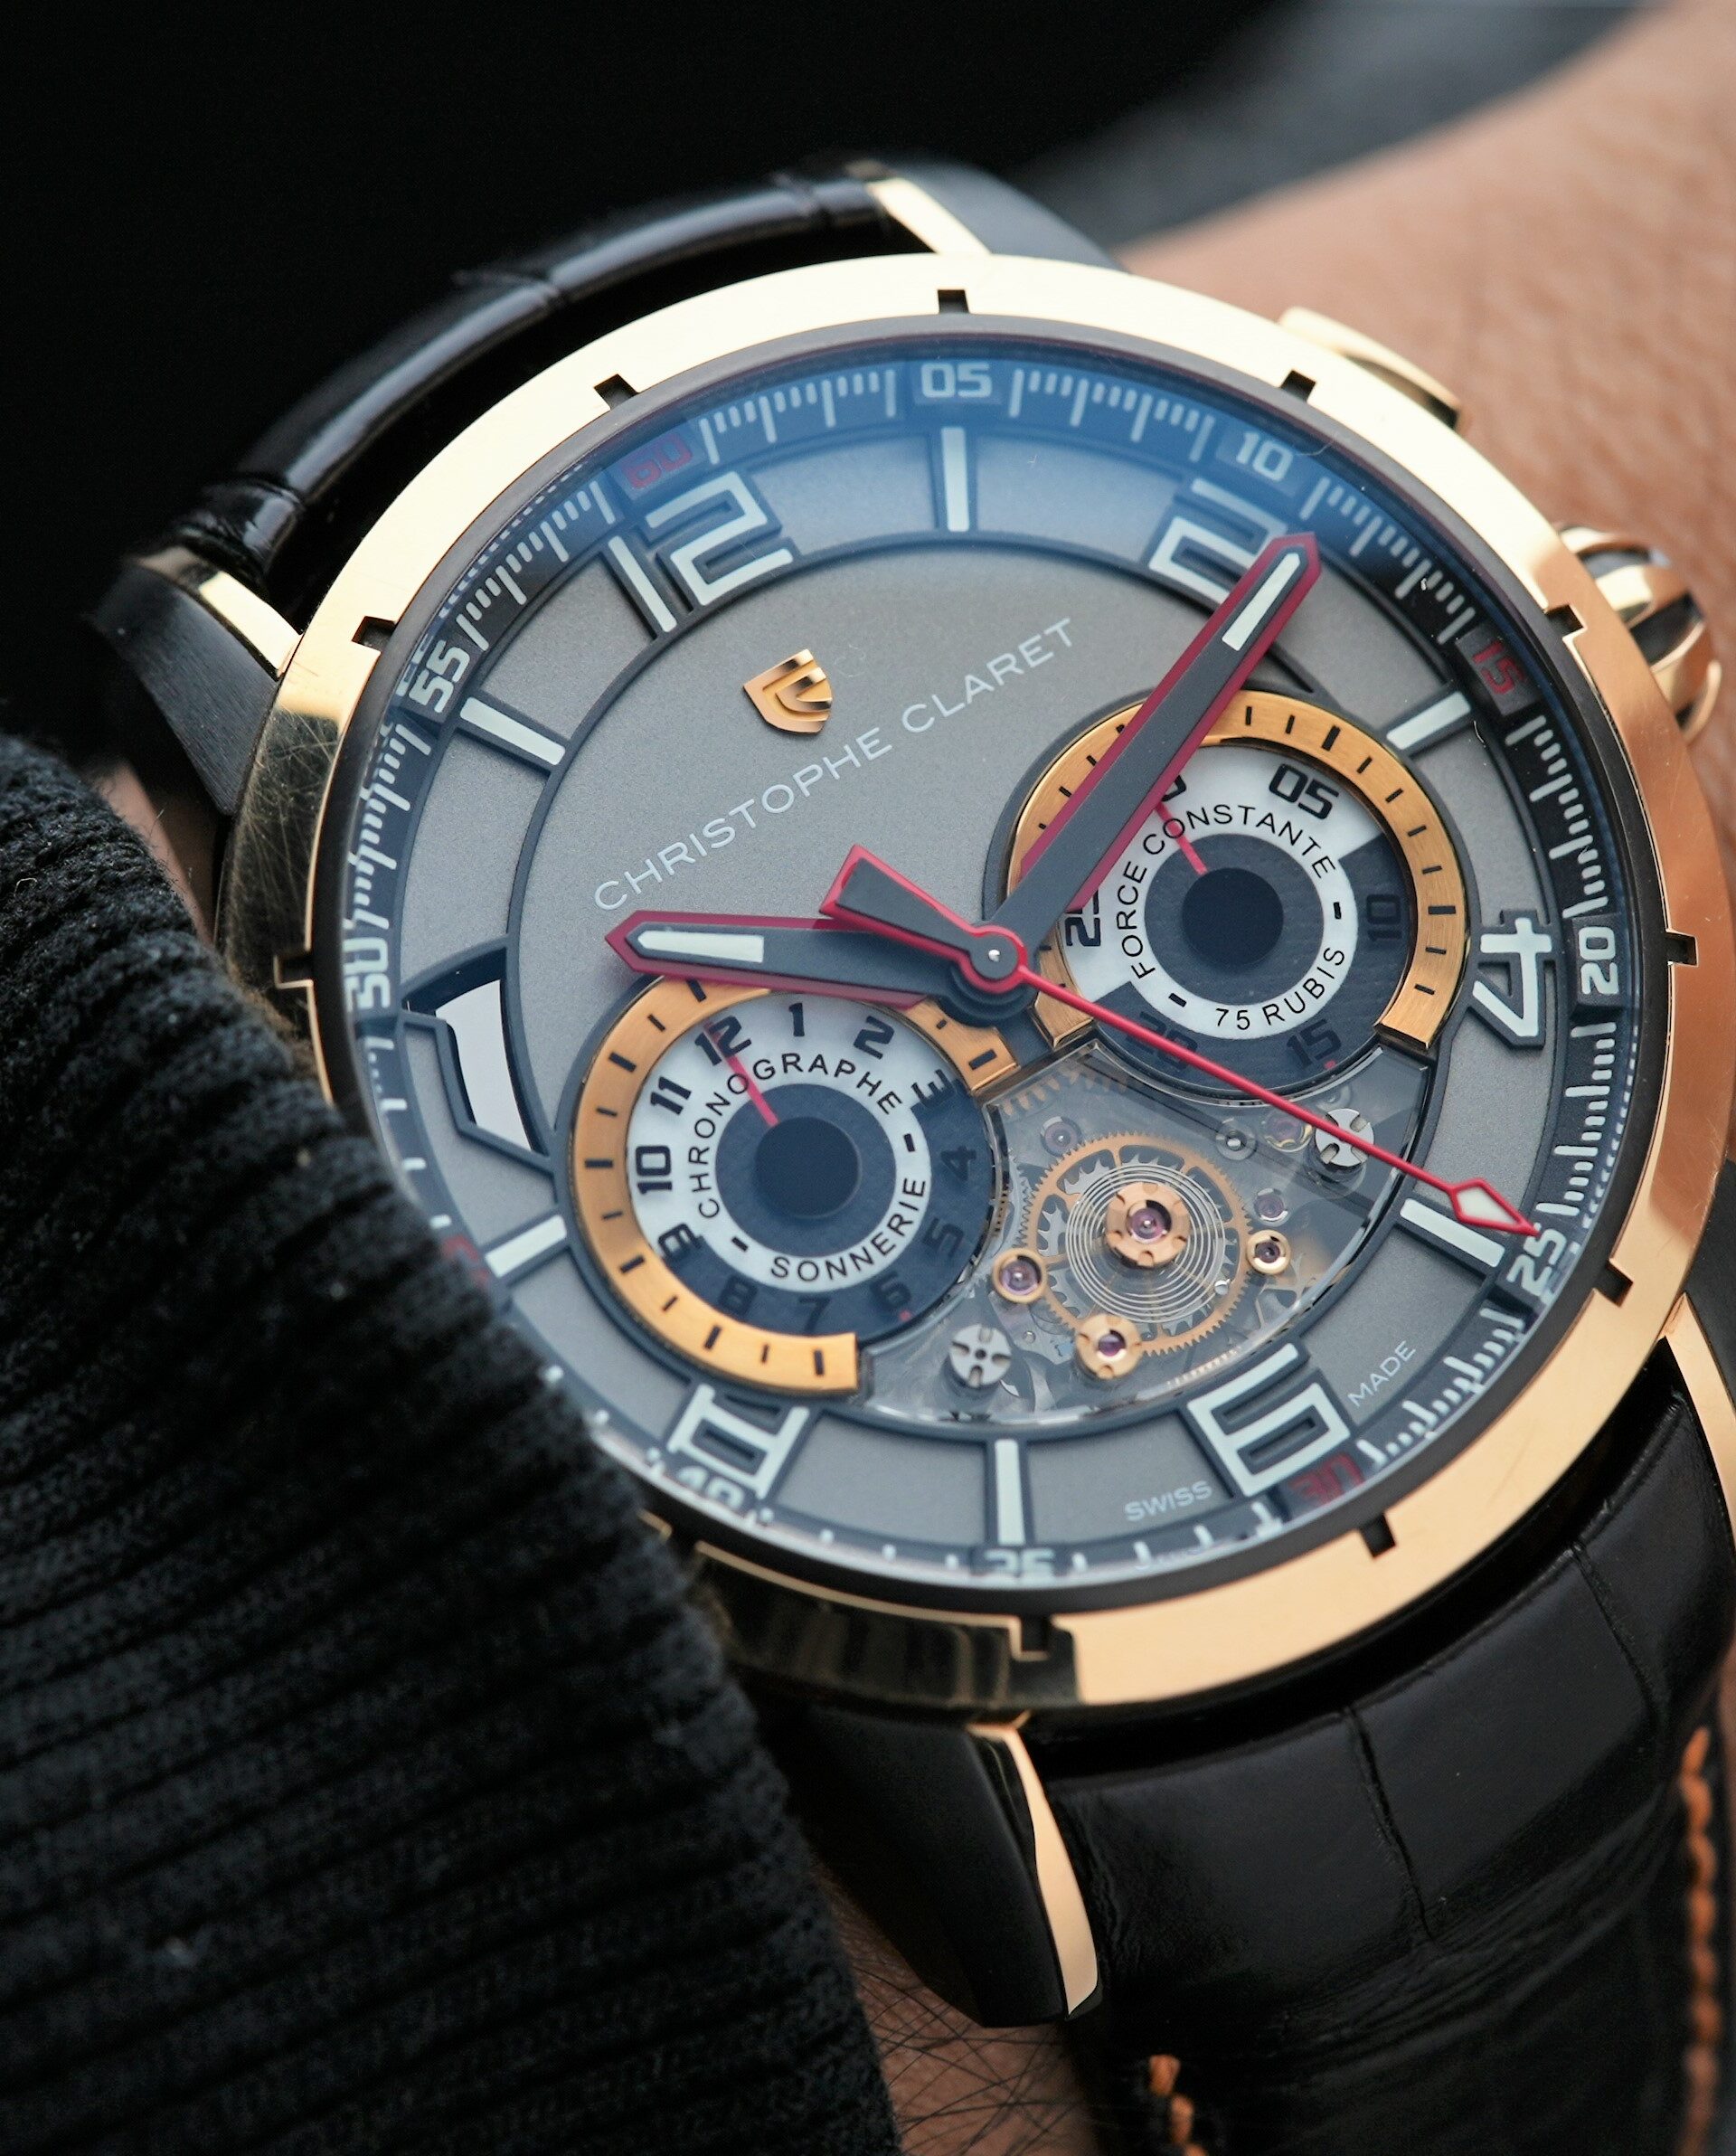 Christophe Claret Kantharos Chime Sonnerie Monopusher Chronograph featured on the wrist.